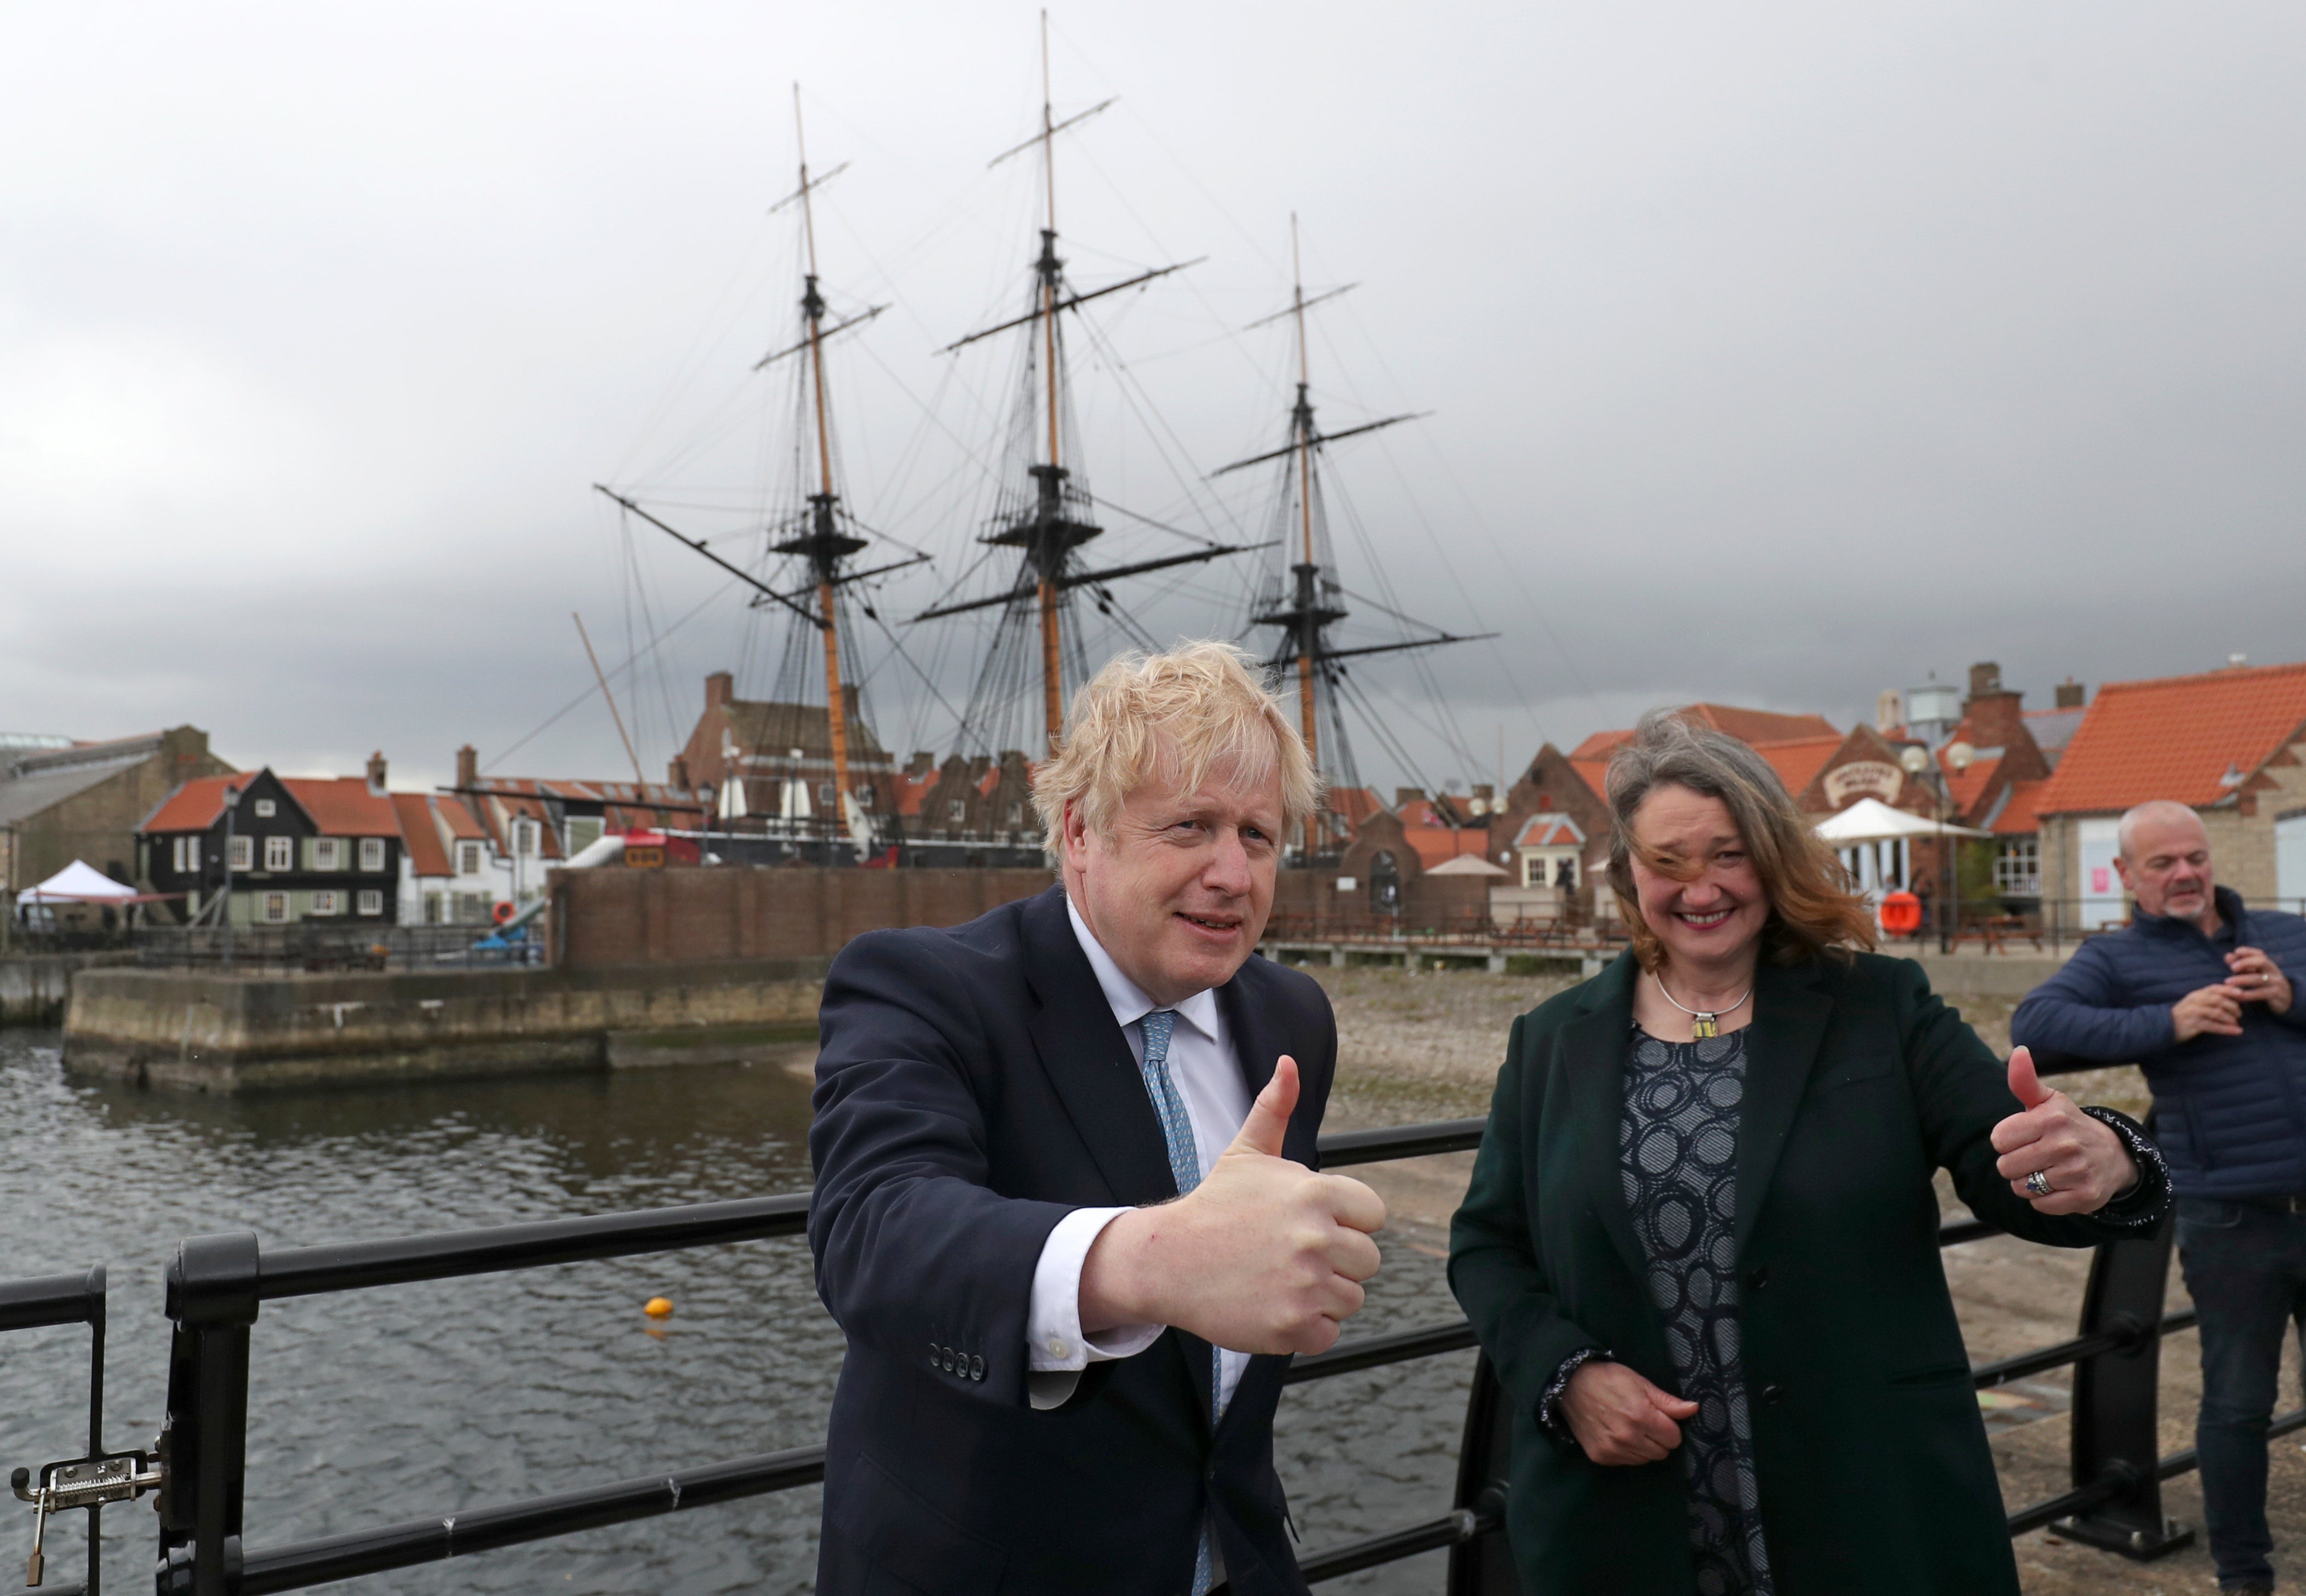 Winning in Hartlepool doesn’t necessarily mean Boris Johnson will go ‘on and on and on’ as prime minister